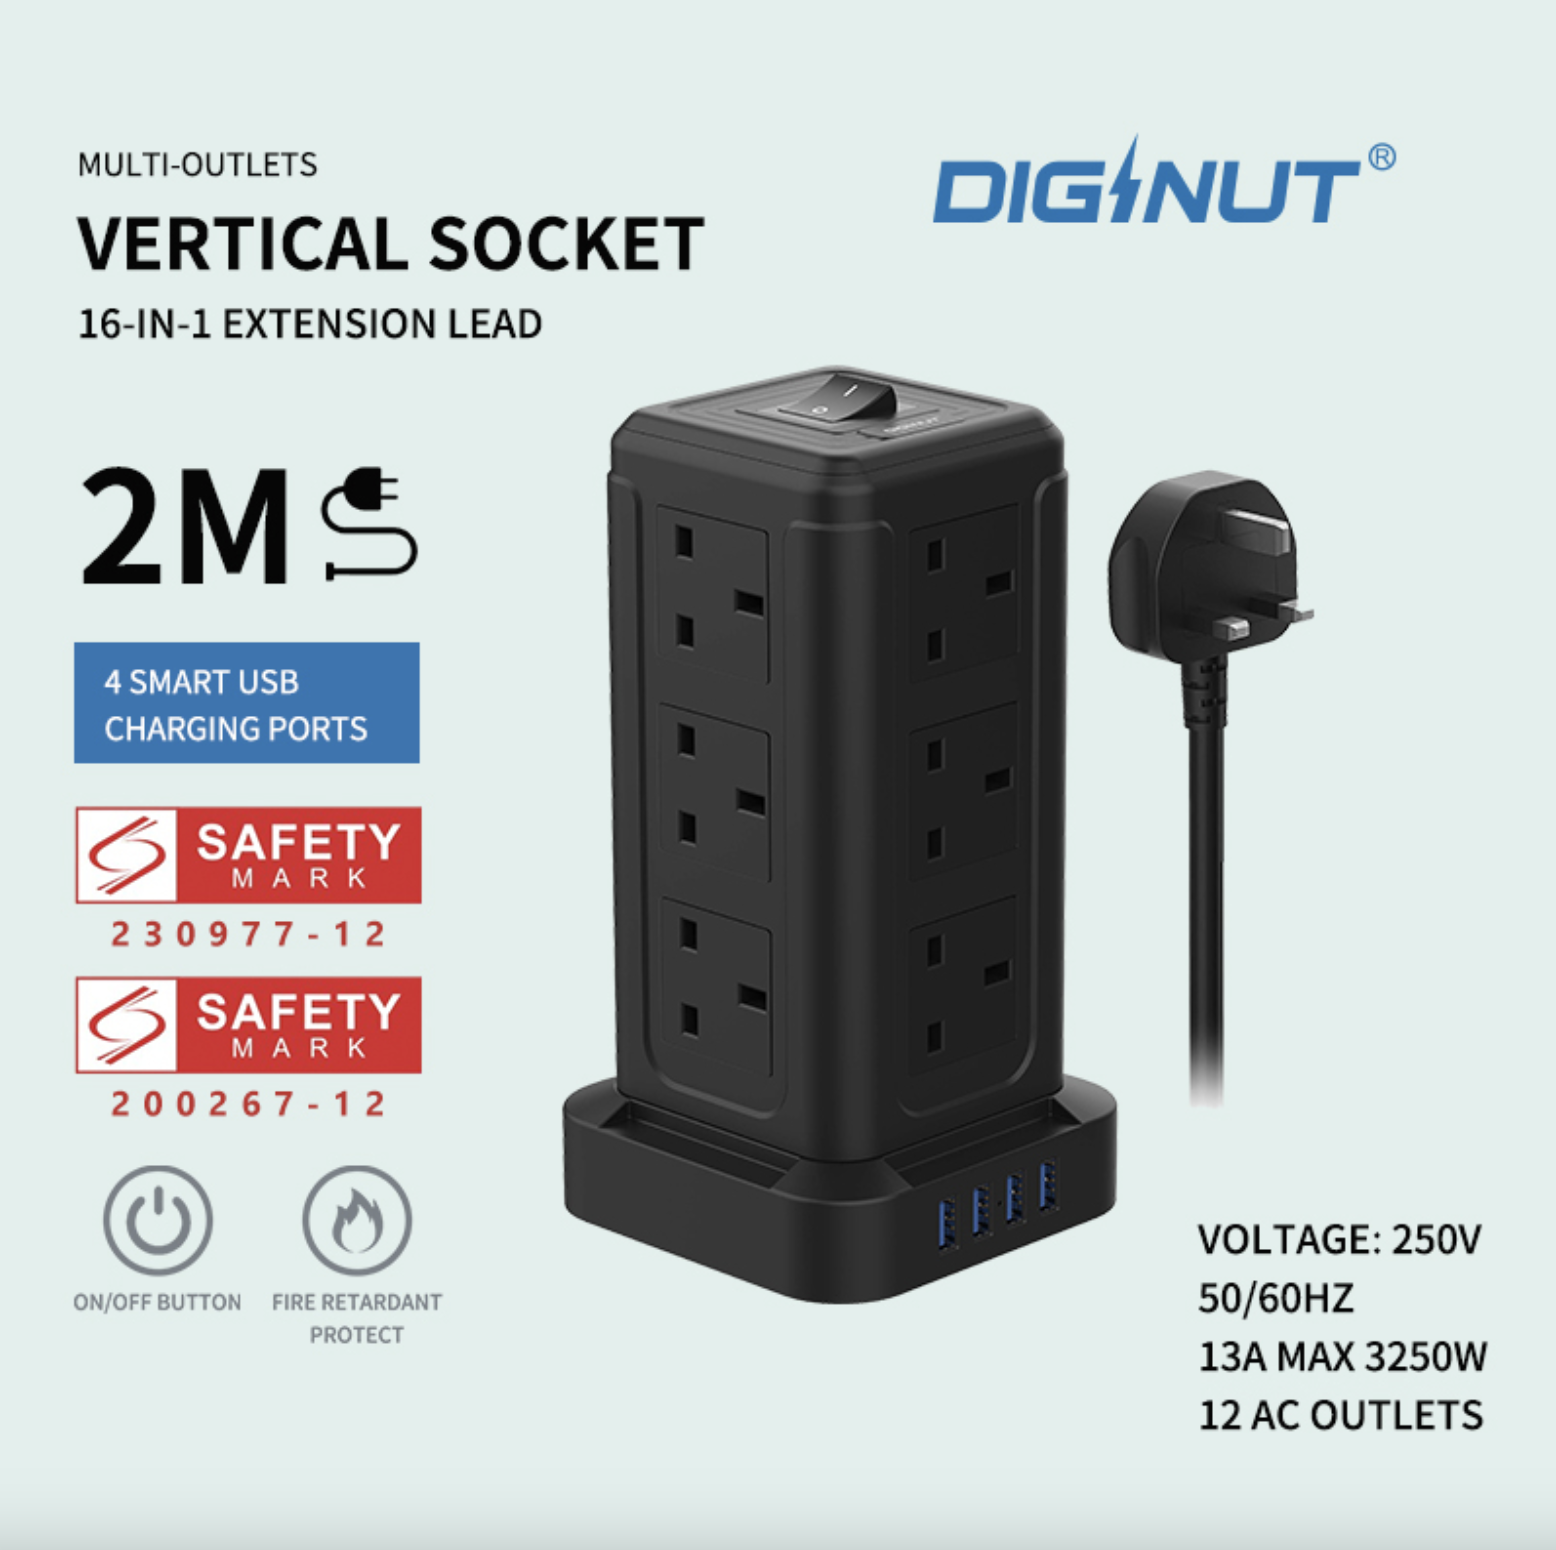 Diginut TP-VF4U12K 16IN1 Vertical Power Socket/ Save More Space/ Safety Mark Approved/ 2 Metres Cables